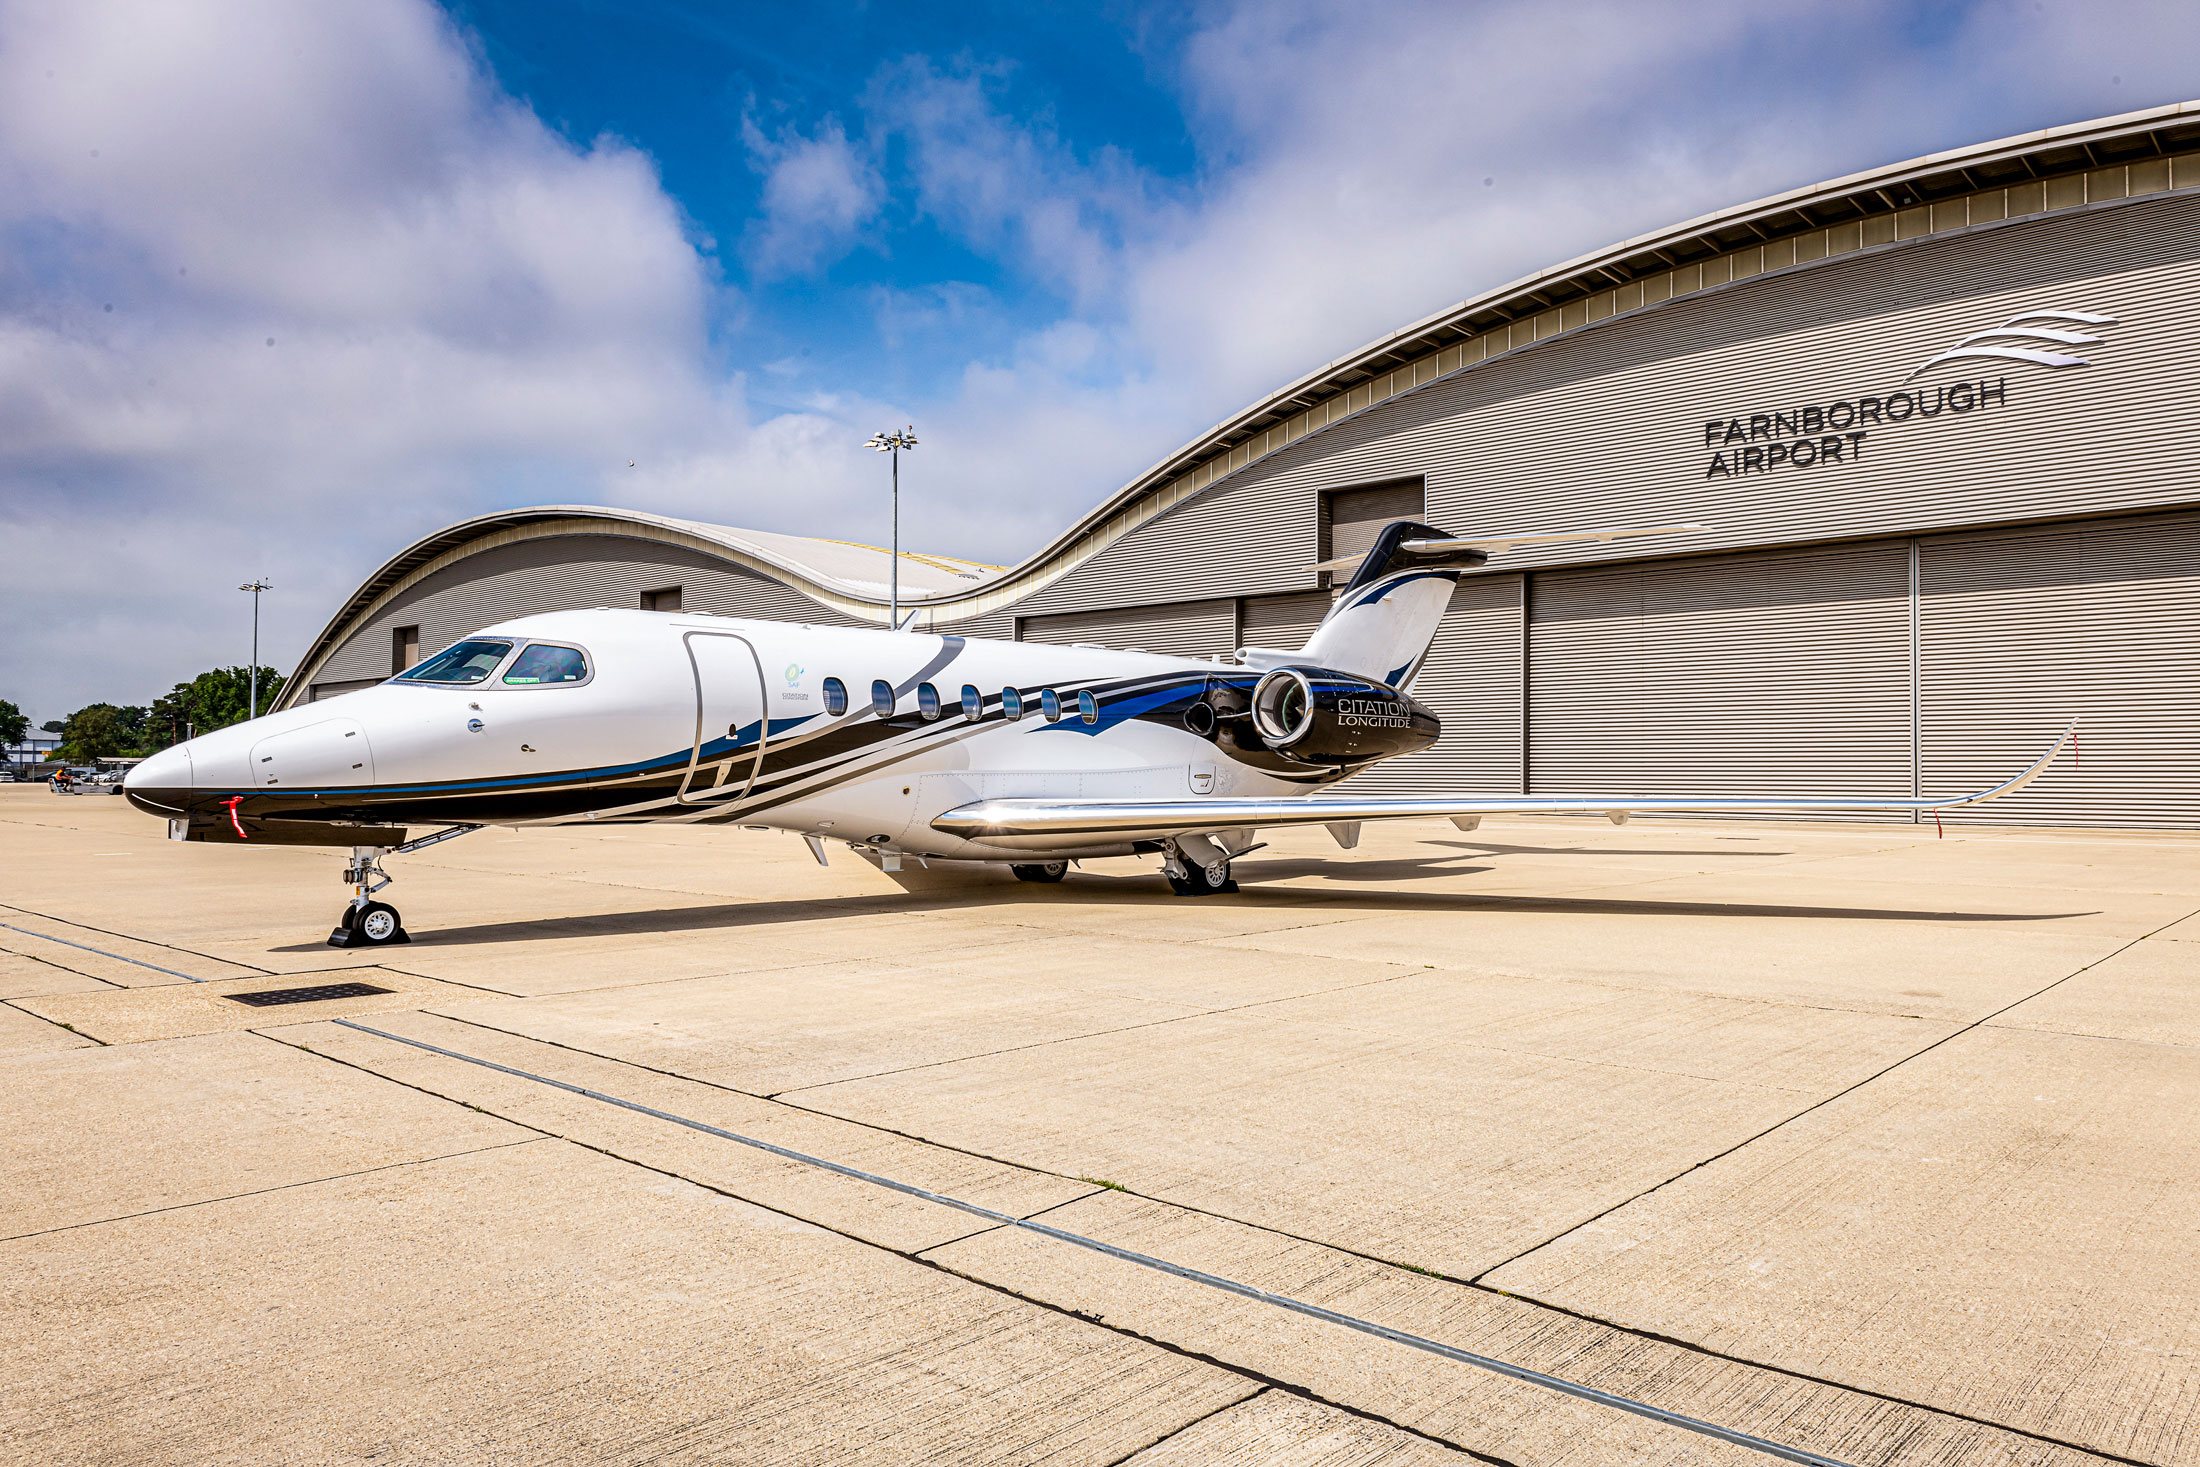 Textron Aviation delivers 8,000th Cessna Citation business jet; Milestone Longitude aircraft joins Scotts Miracle-Gro’s fleet of Citations